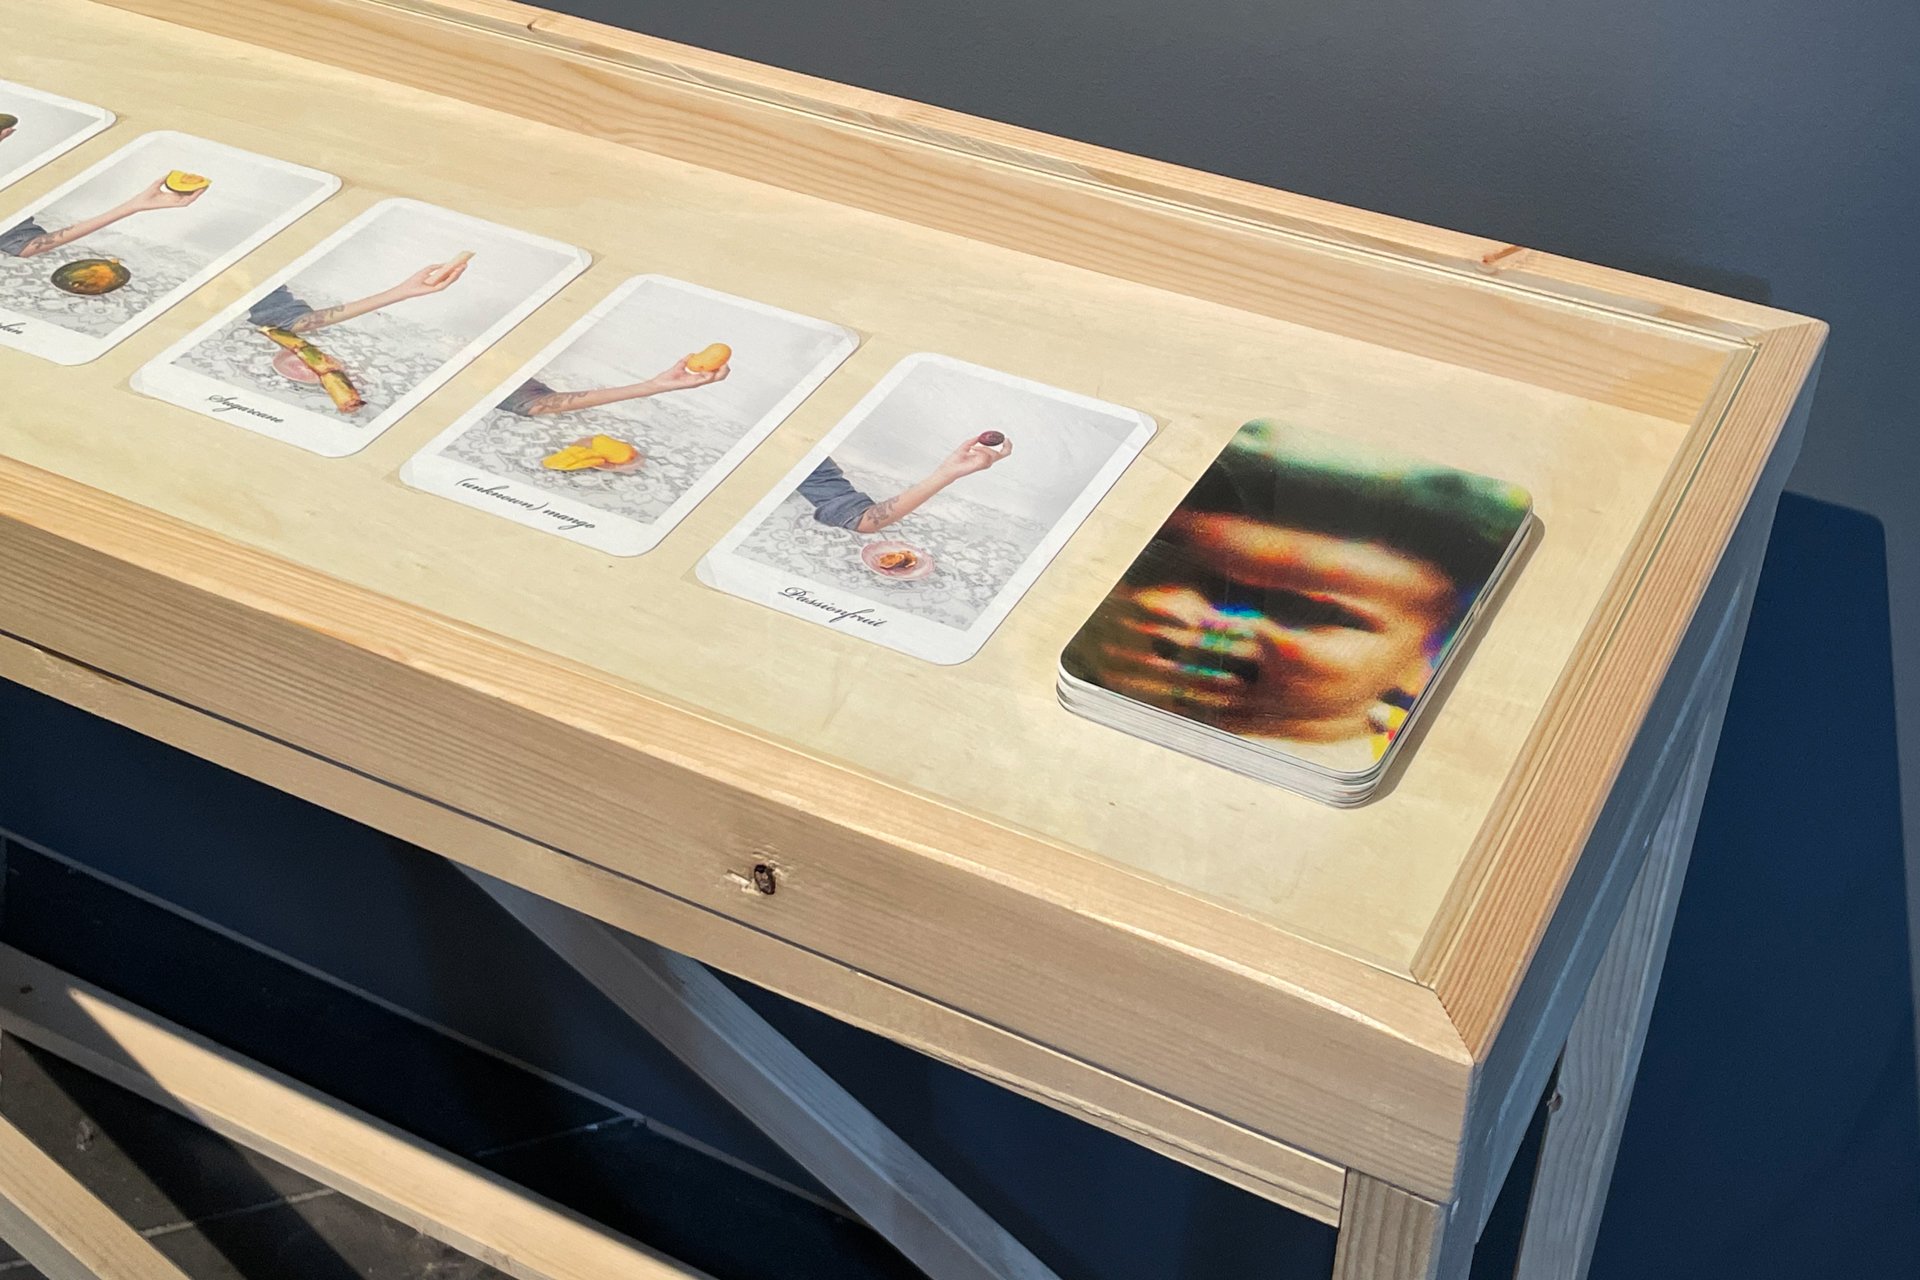   Flashcards, 2018-ongoing    20 4x6 inch cards, accompanied by  a recording of my mother teaching me names of the fruits and vegetables shown, while I repeat her words.    Shown in installation at Le Recontres d’Arles 2023  